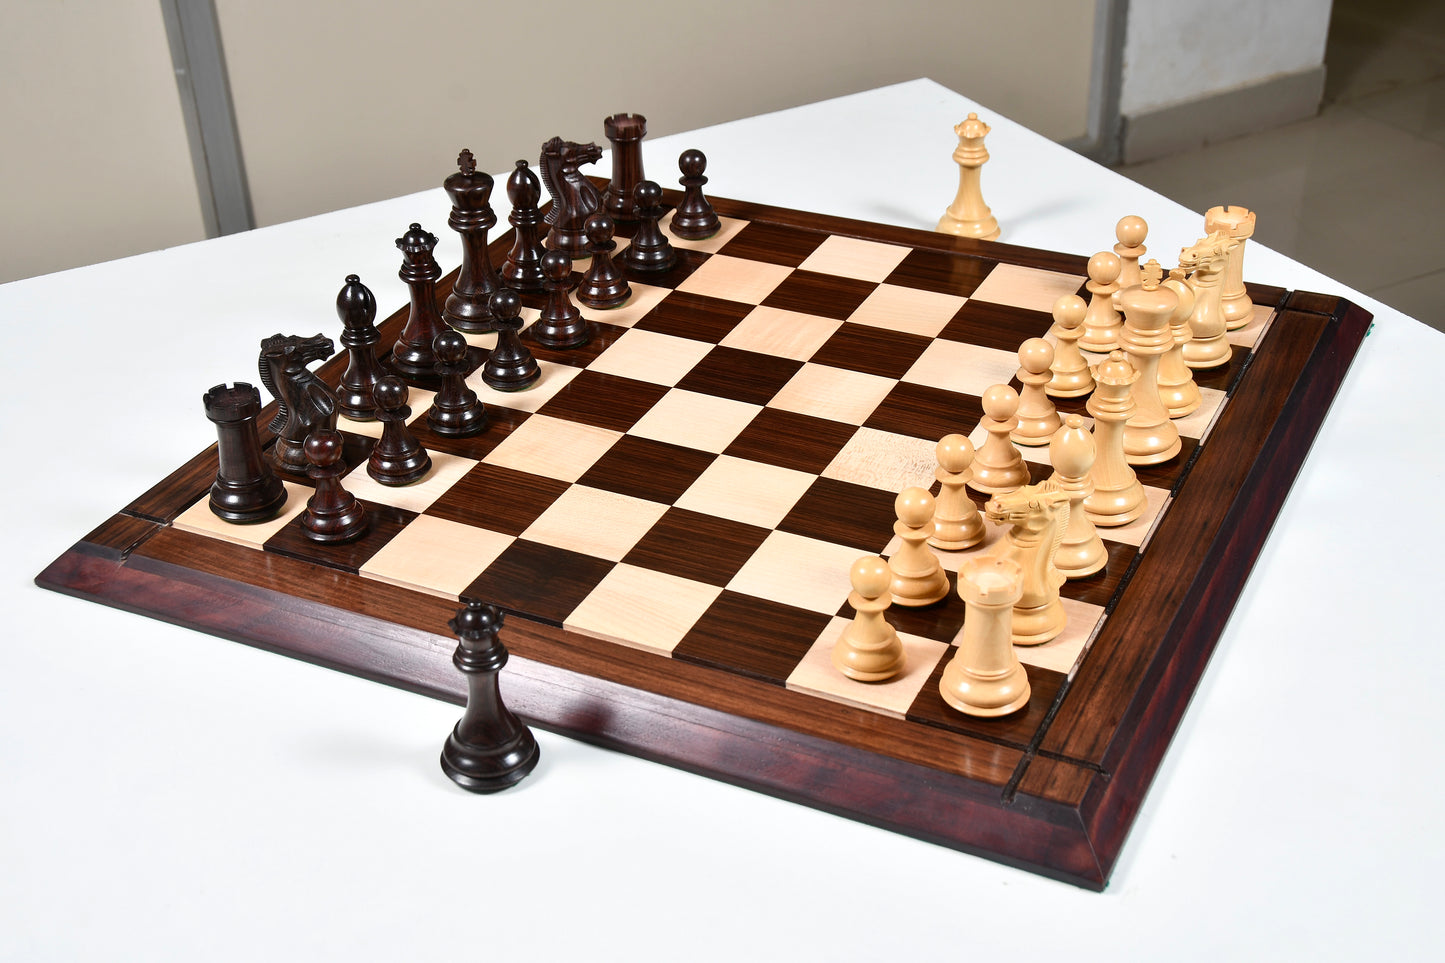 The Honour of Staunton (HOS) Series Weighted Chess Pieces in Rose wood & Box Wood - 4.0" King